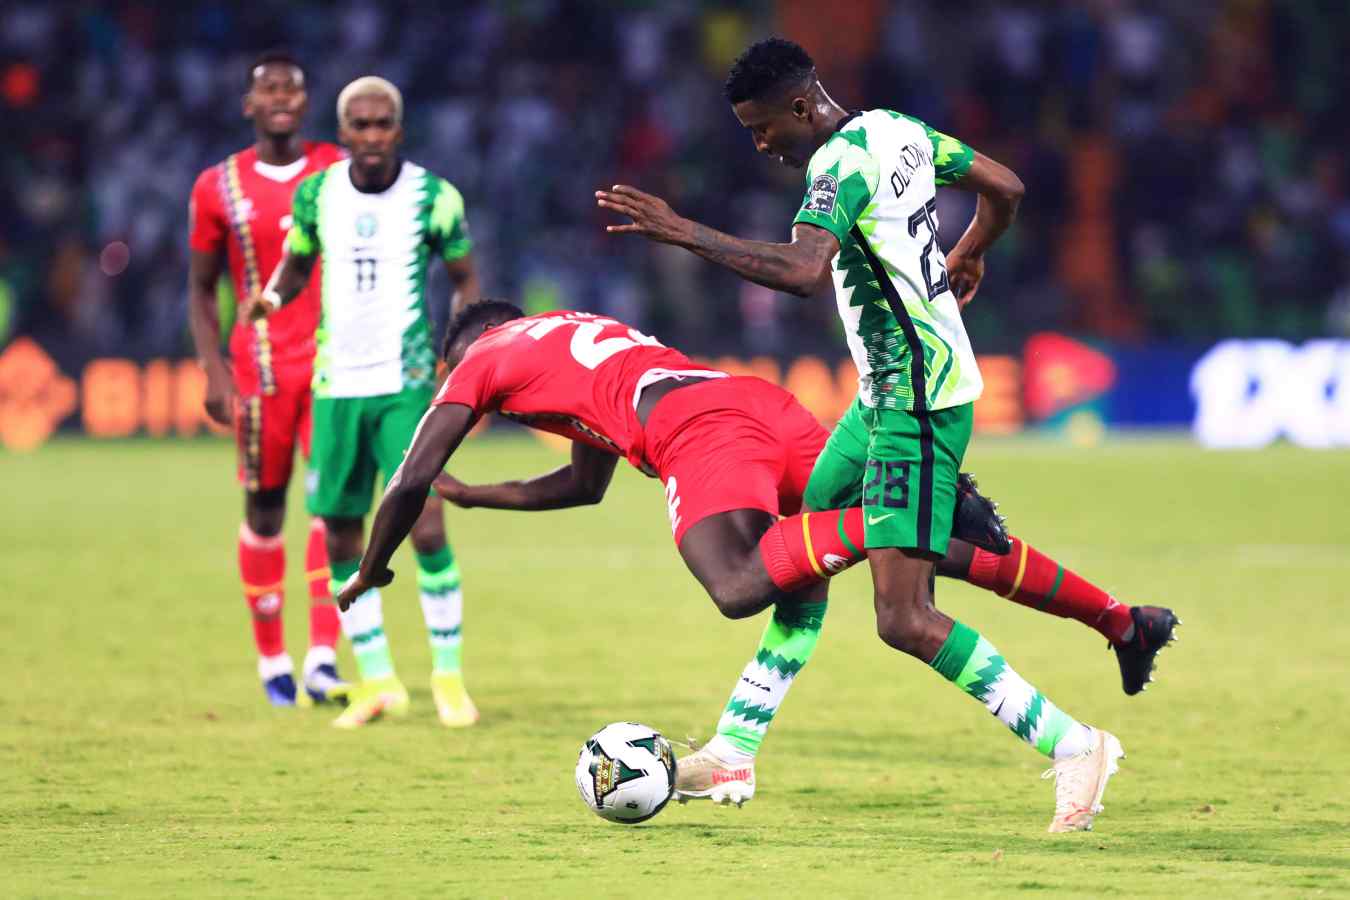 Nigeria vs Tunisia AFCON Live Stream: How to watch it in the US - The Hiu